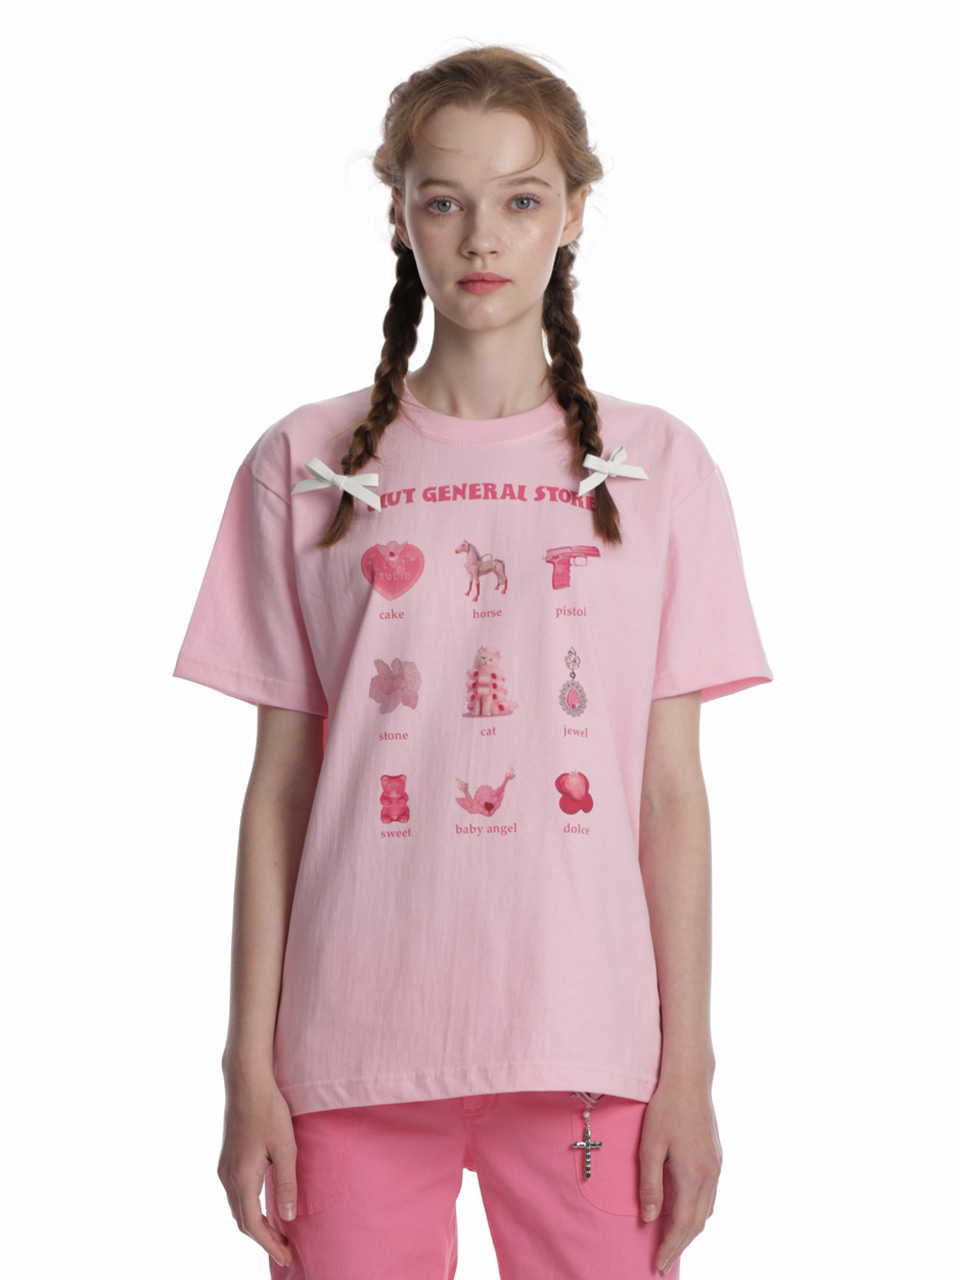 0 1 clut general store t-shirt - PINK